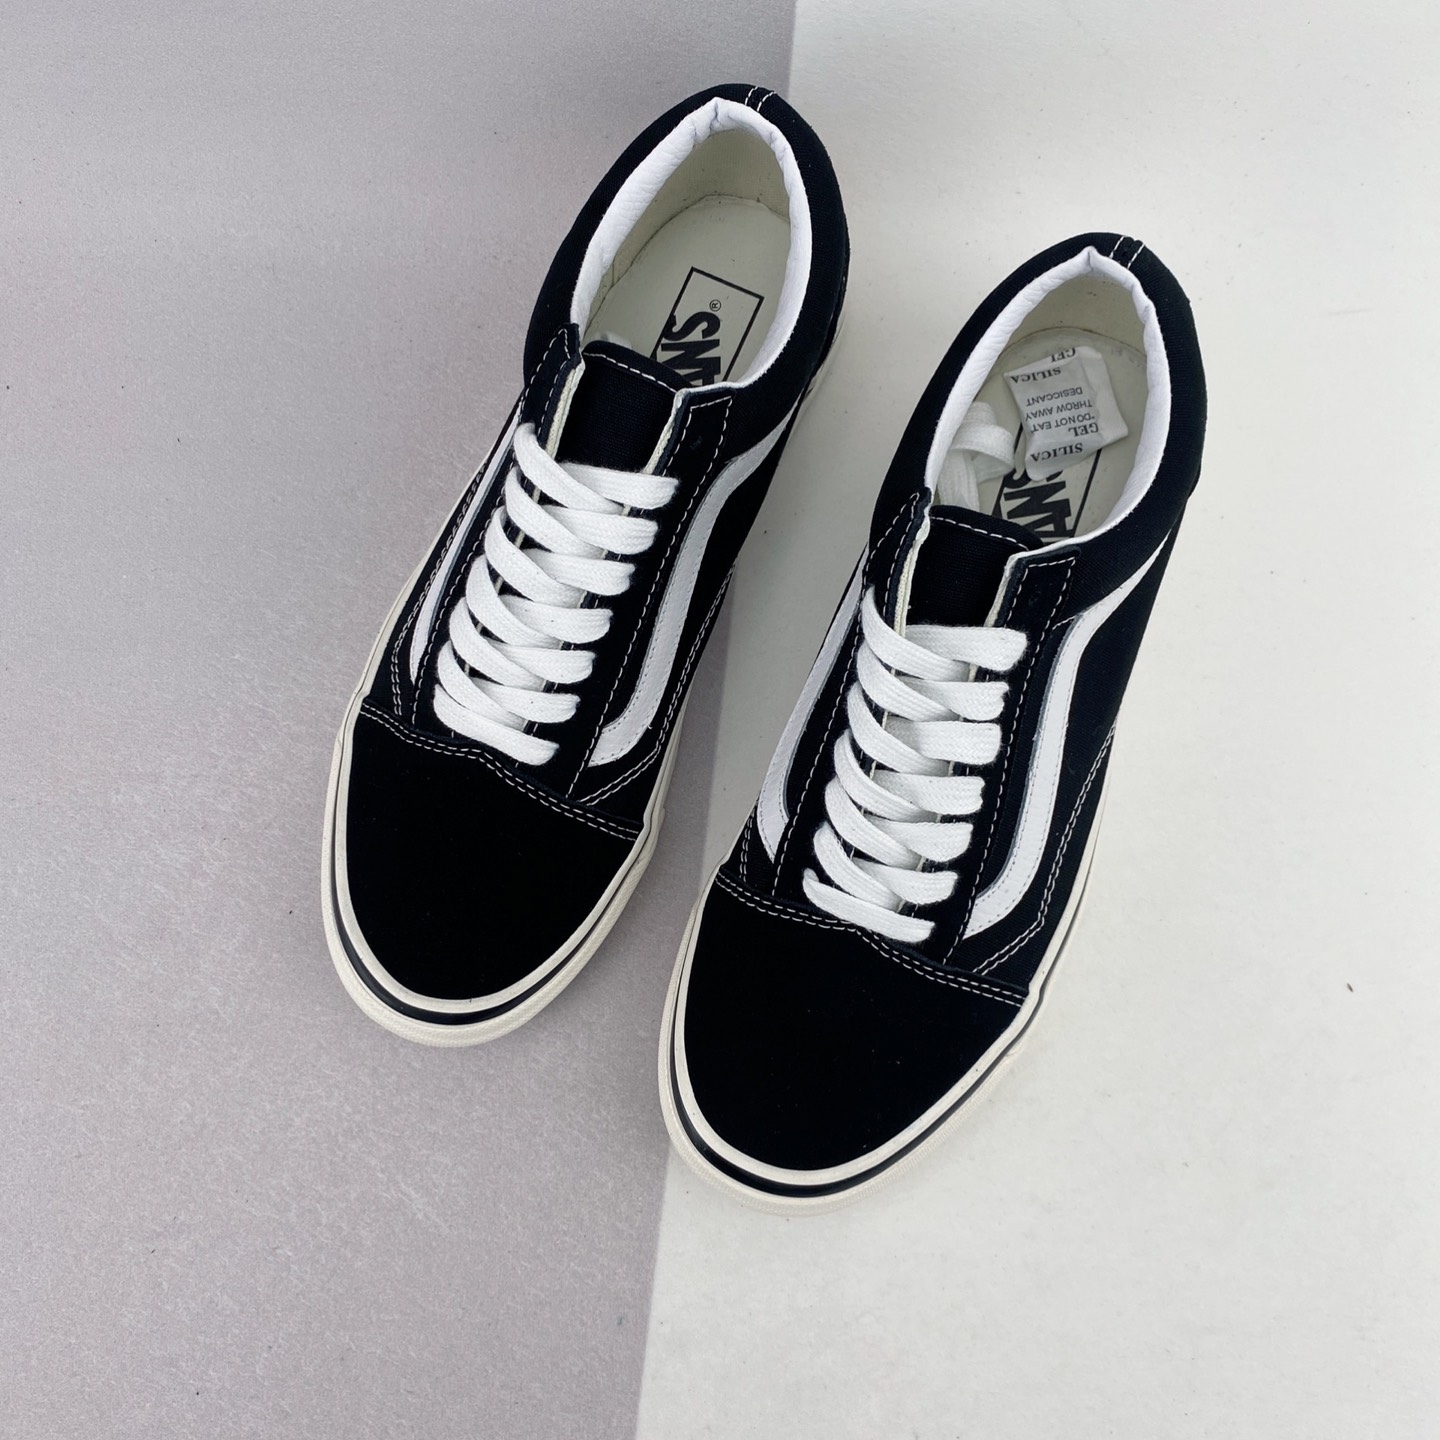 Vans Old Skool 36 DX Black White Shoes - Latest Styles & Quality